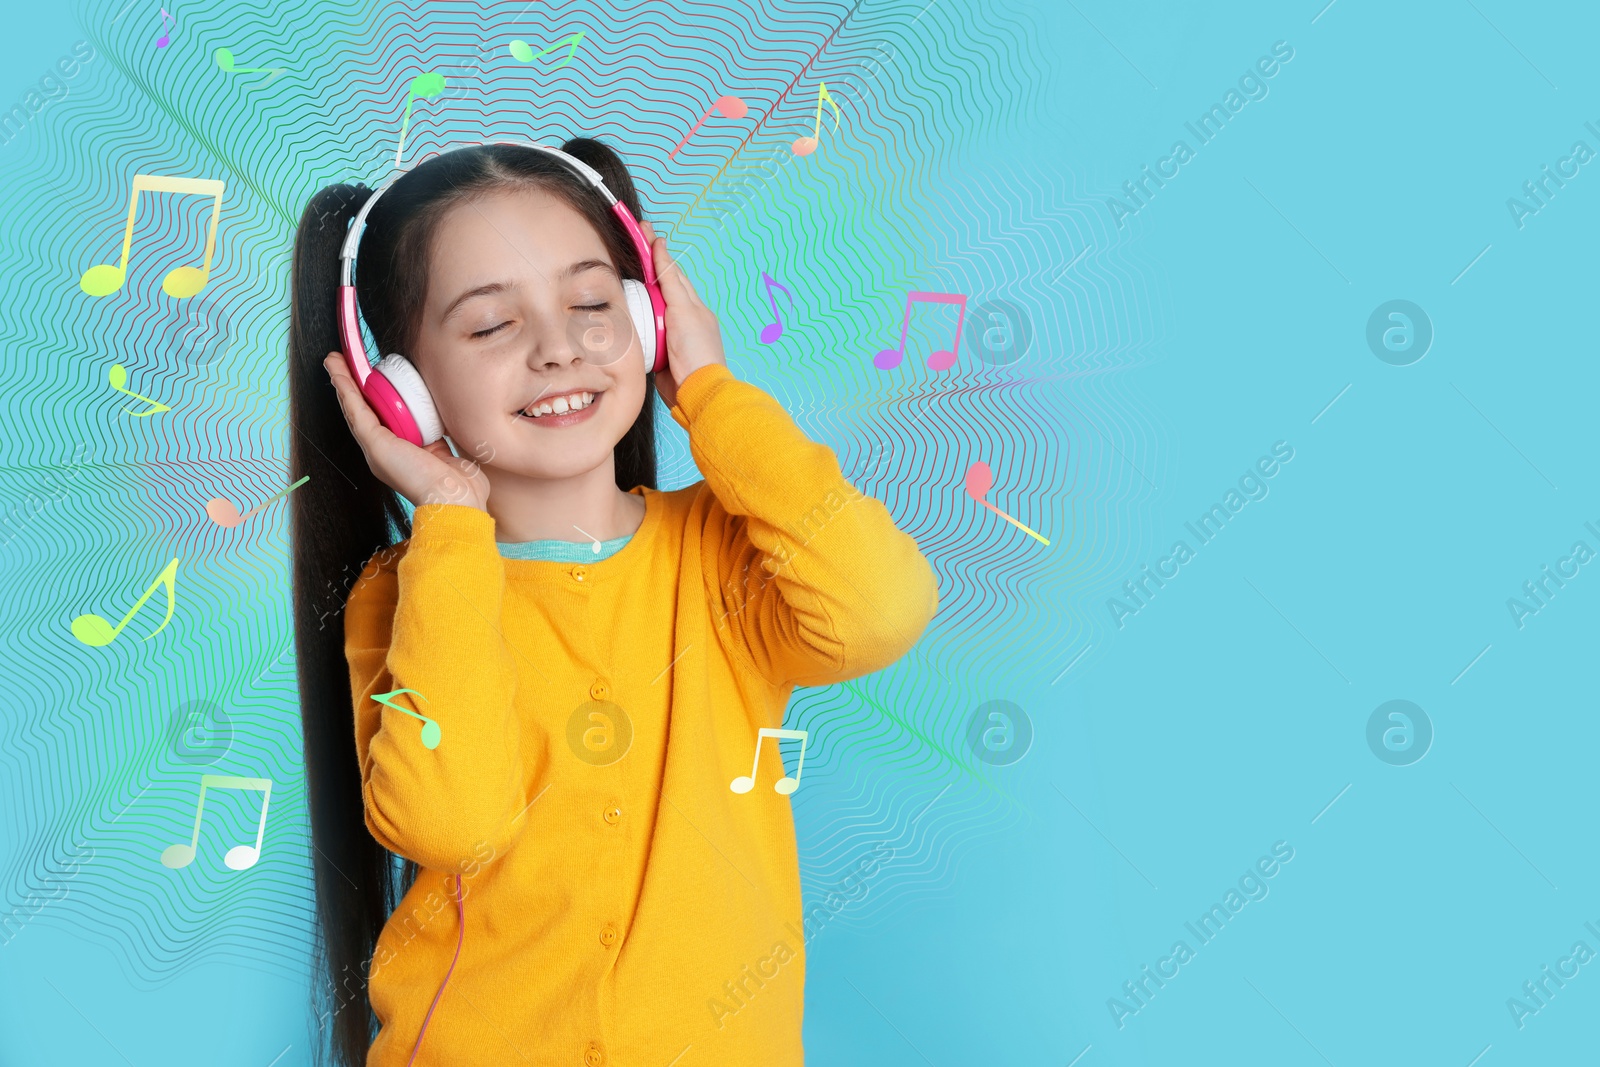 Image of Cute girl listening to music through headphones on light blue background, space for text. Music notes illustrations